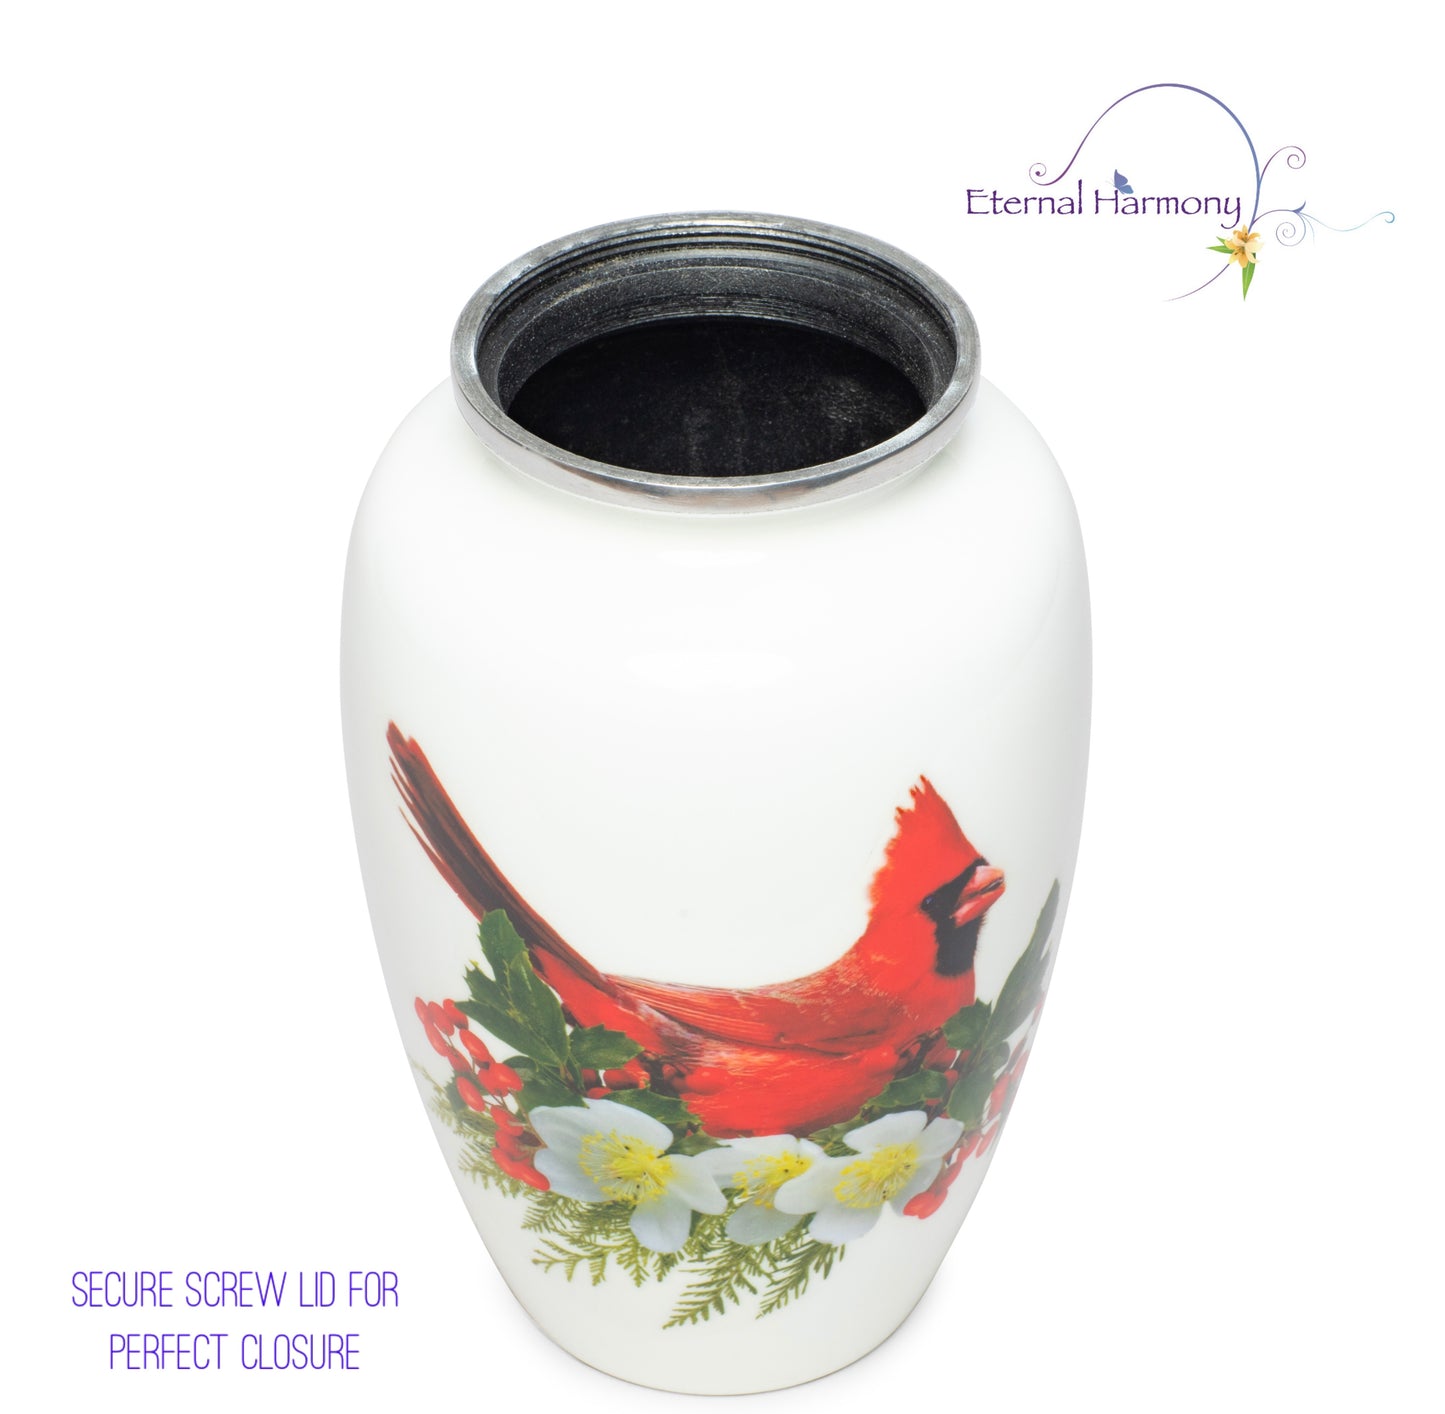 Adult Urn Large in Cardenal